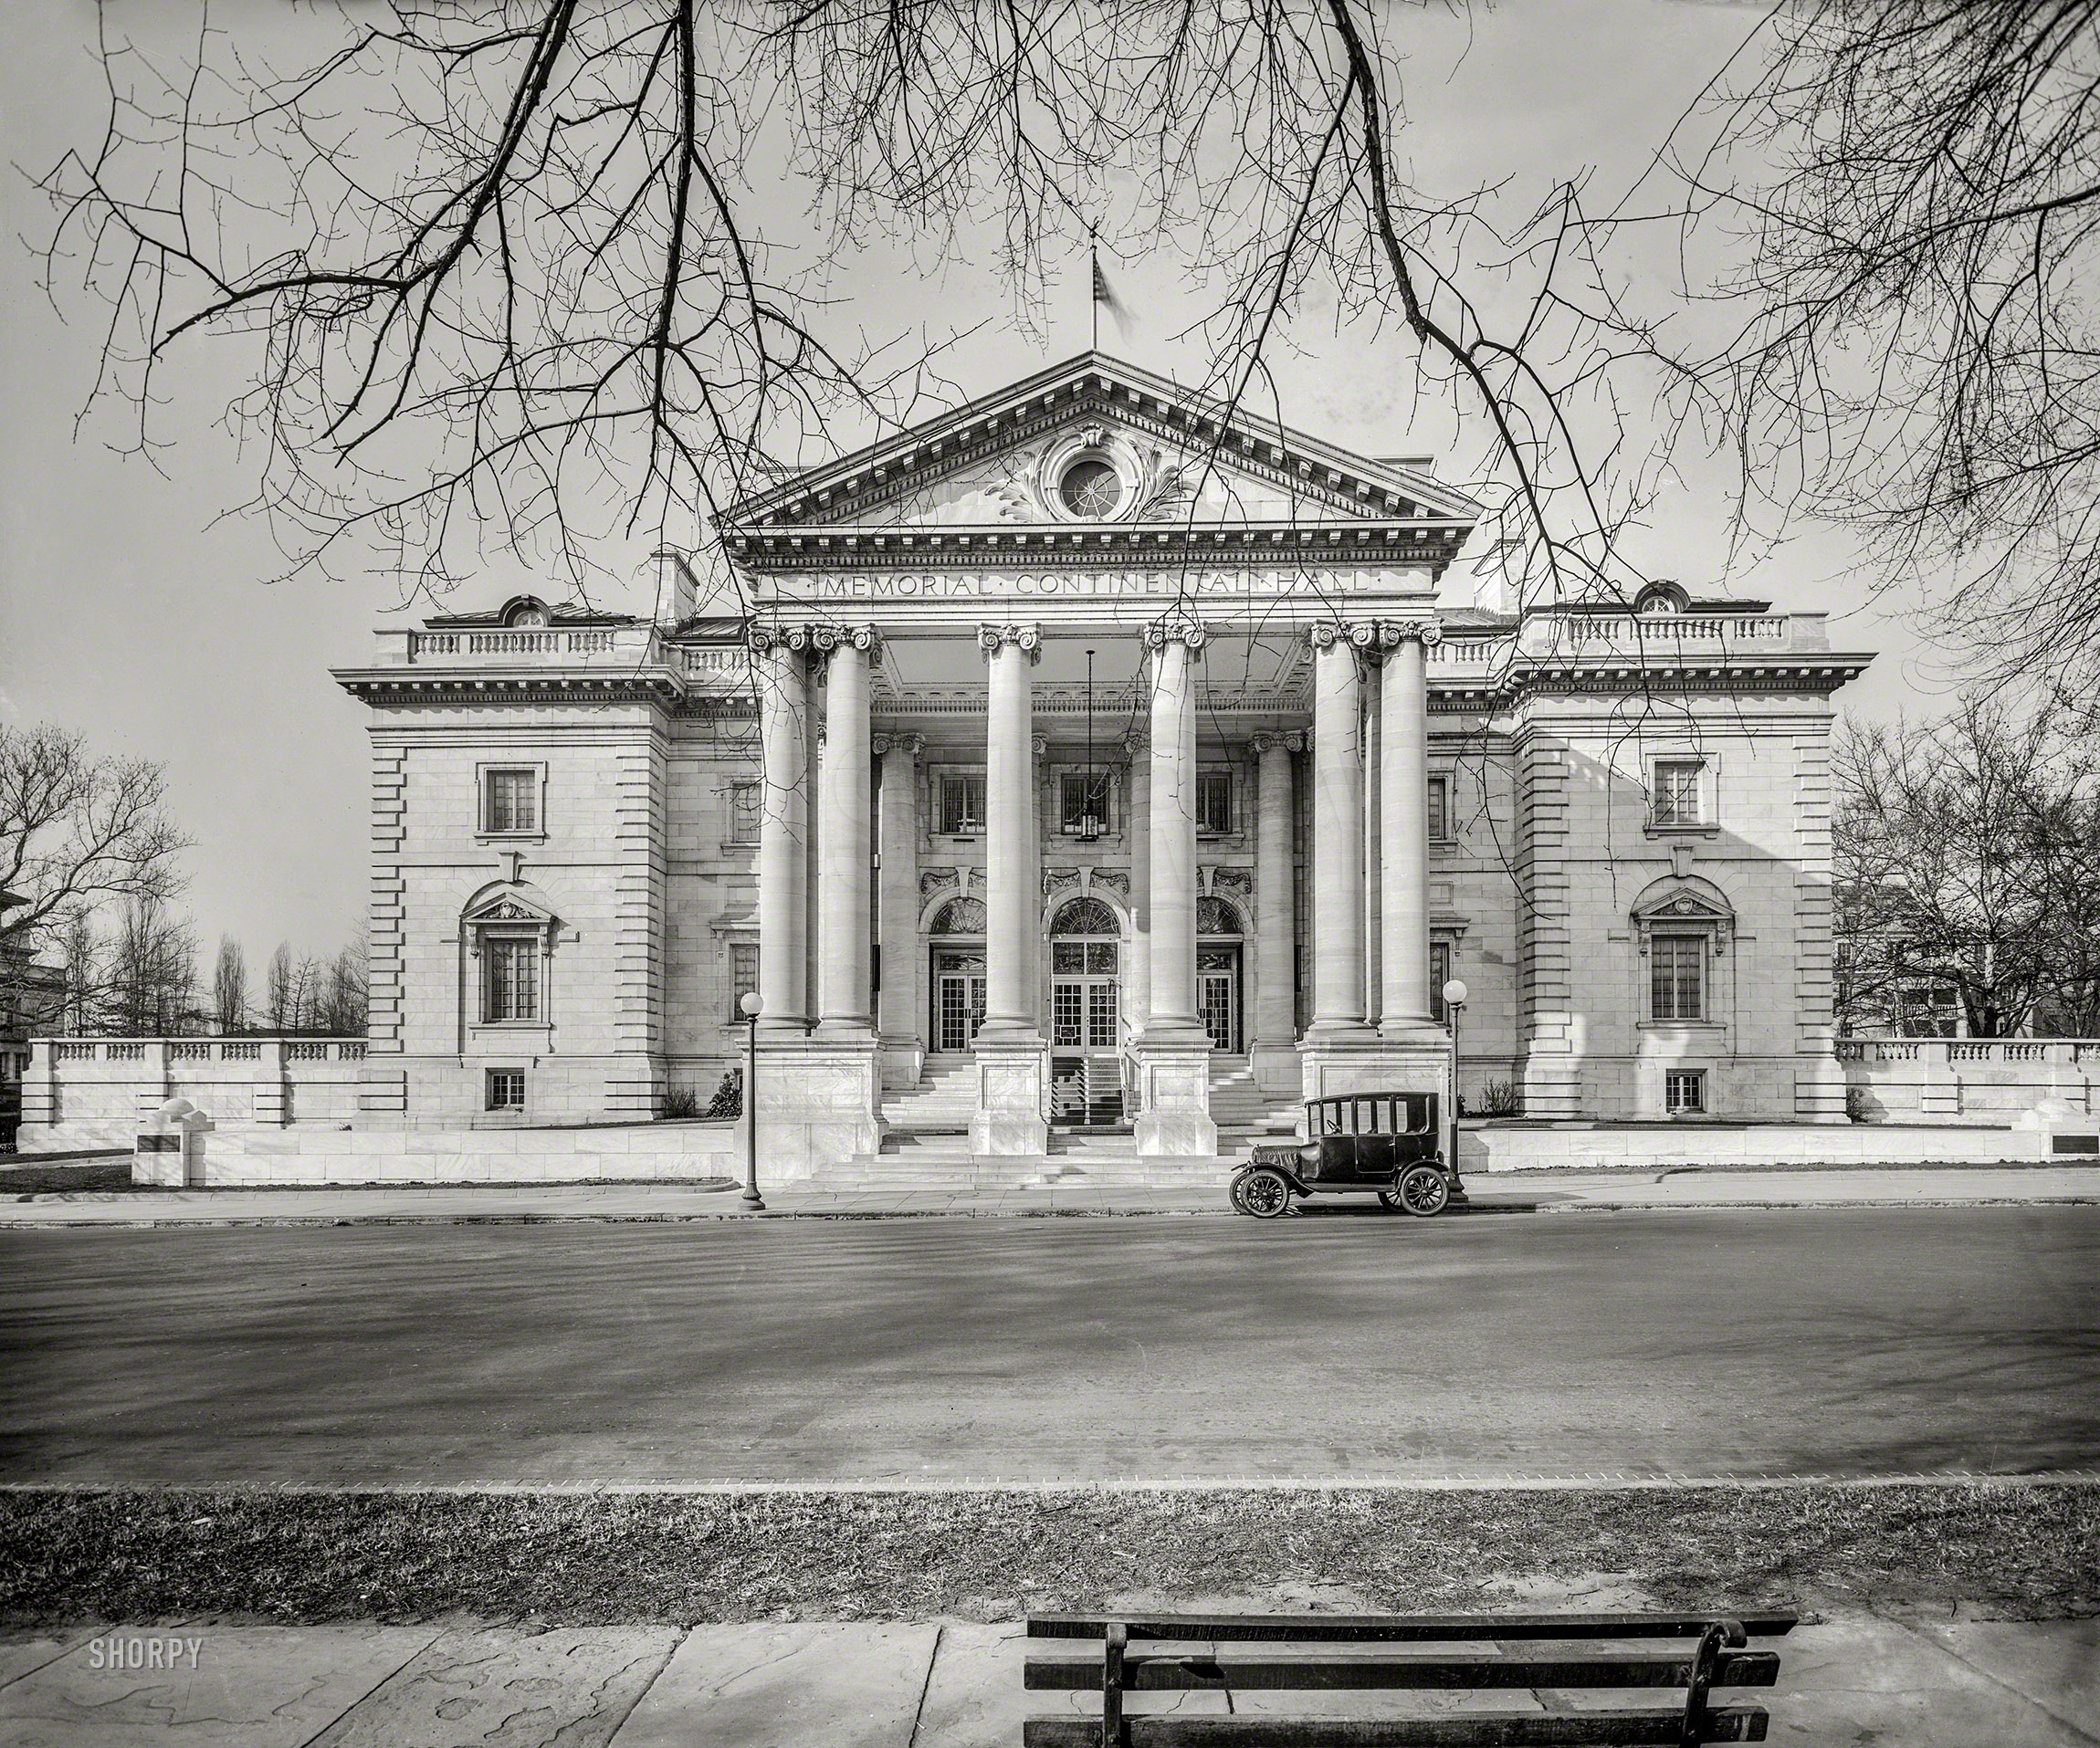 Washington, D.C., circa 1924. "Memorial Continental Hall, 17th Street N.W." National headquarters of the Daughters of the American Revolution. National Photo Company Collection glass negative. View full size.